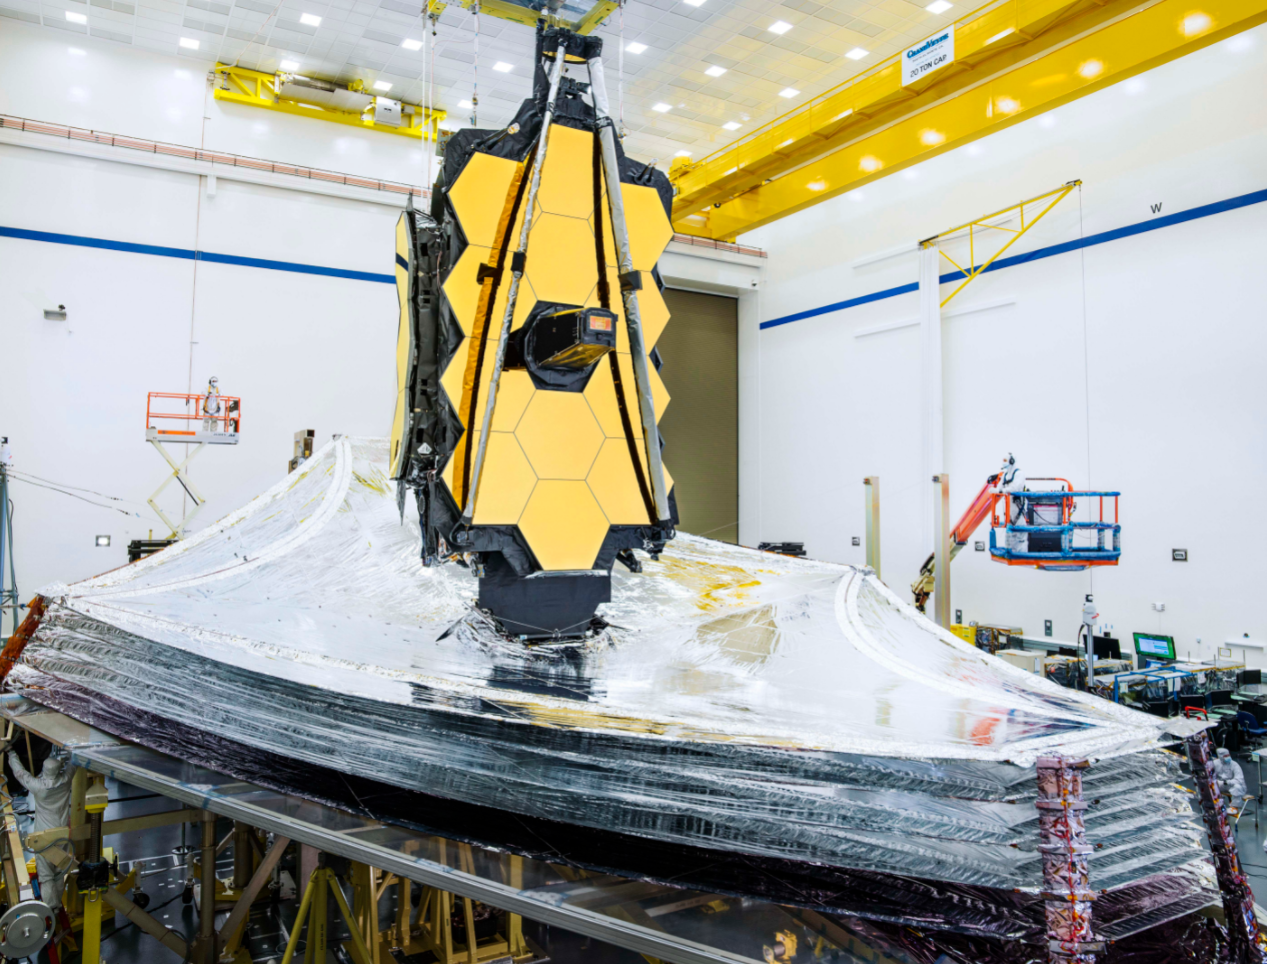 Thousands of parts must work correctly, in sequence, to unfold NASA’s James Webb Space Telescope into its final configuration, all while it flies to a destination nearly 1 million miles away. Credits: NASA/Chris Gunn